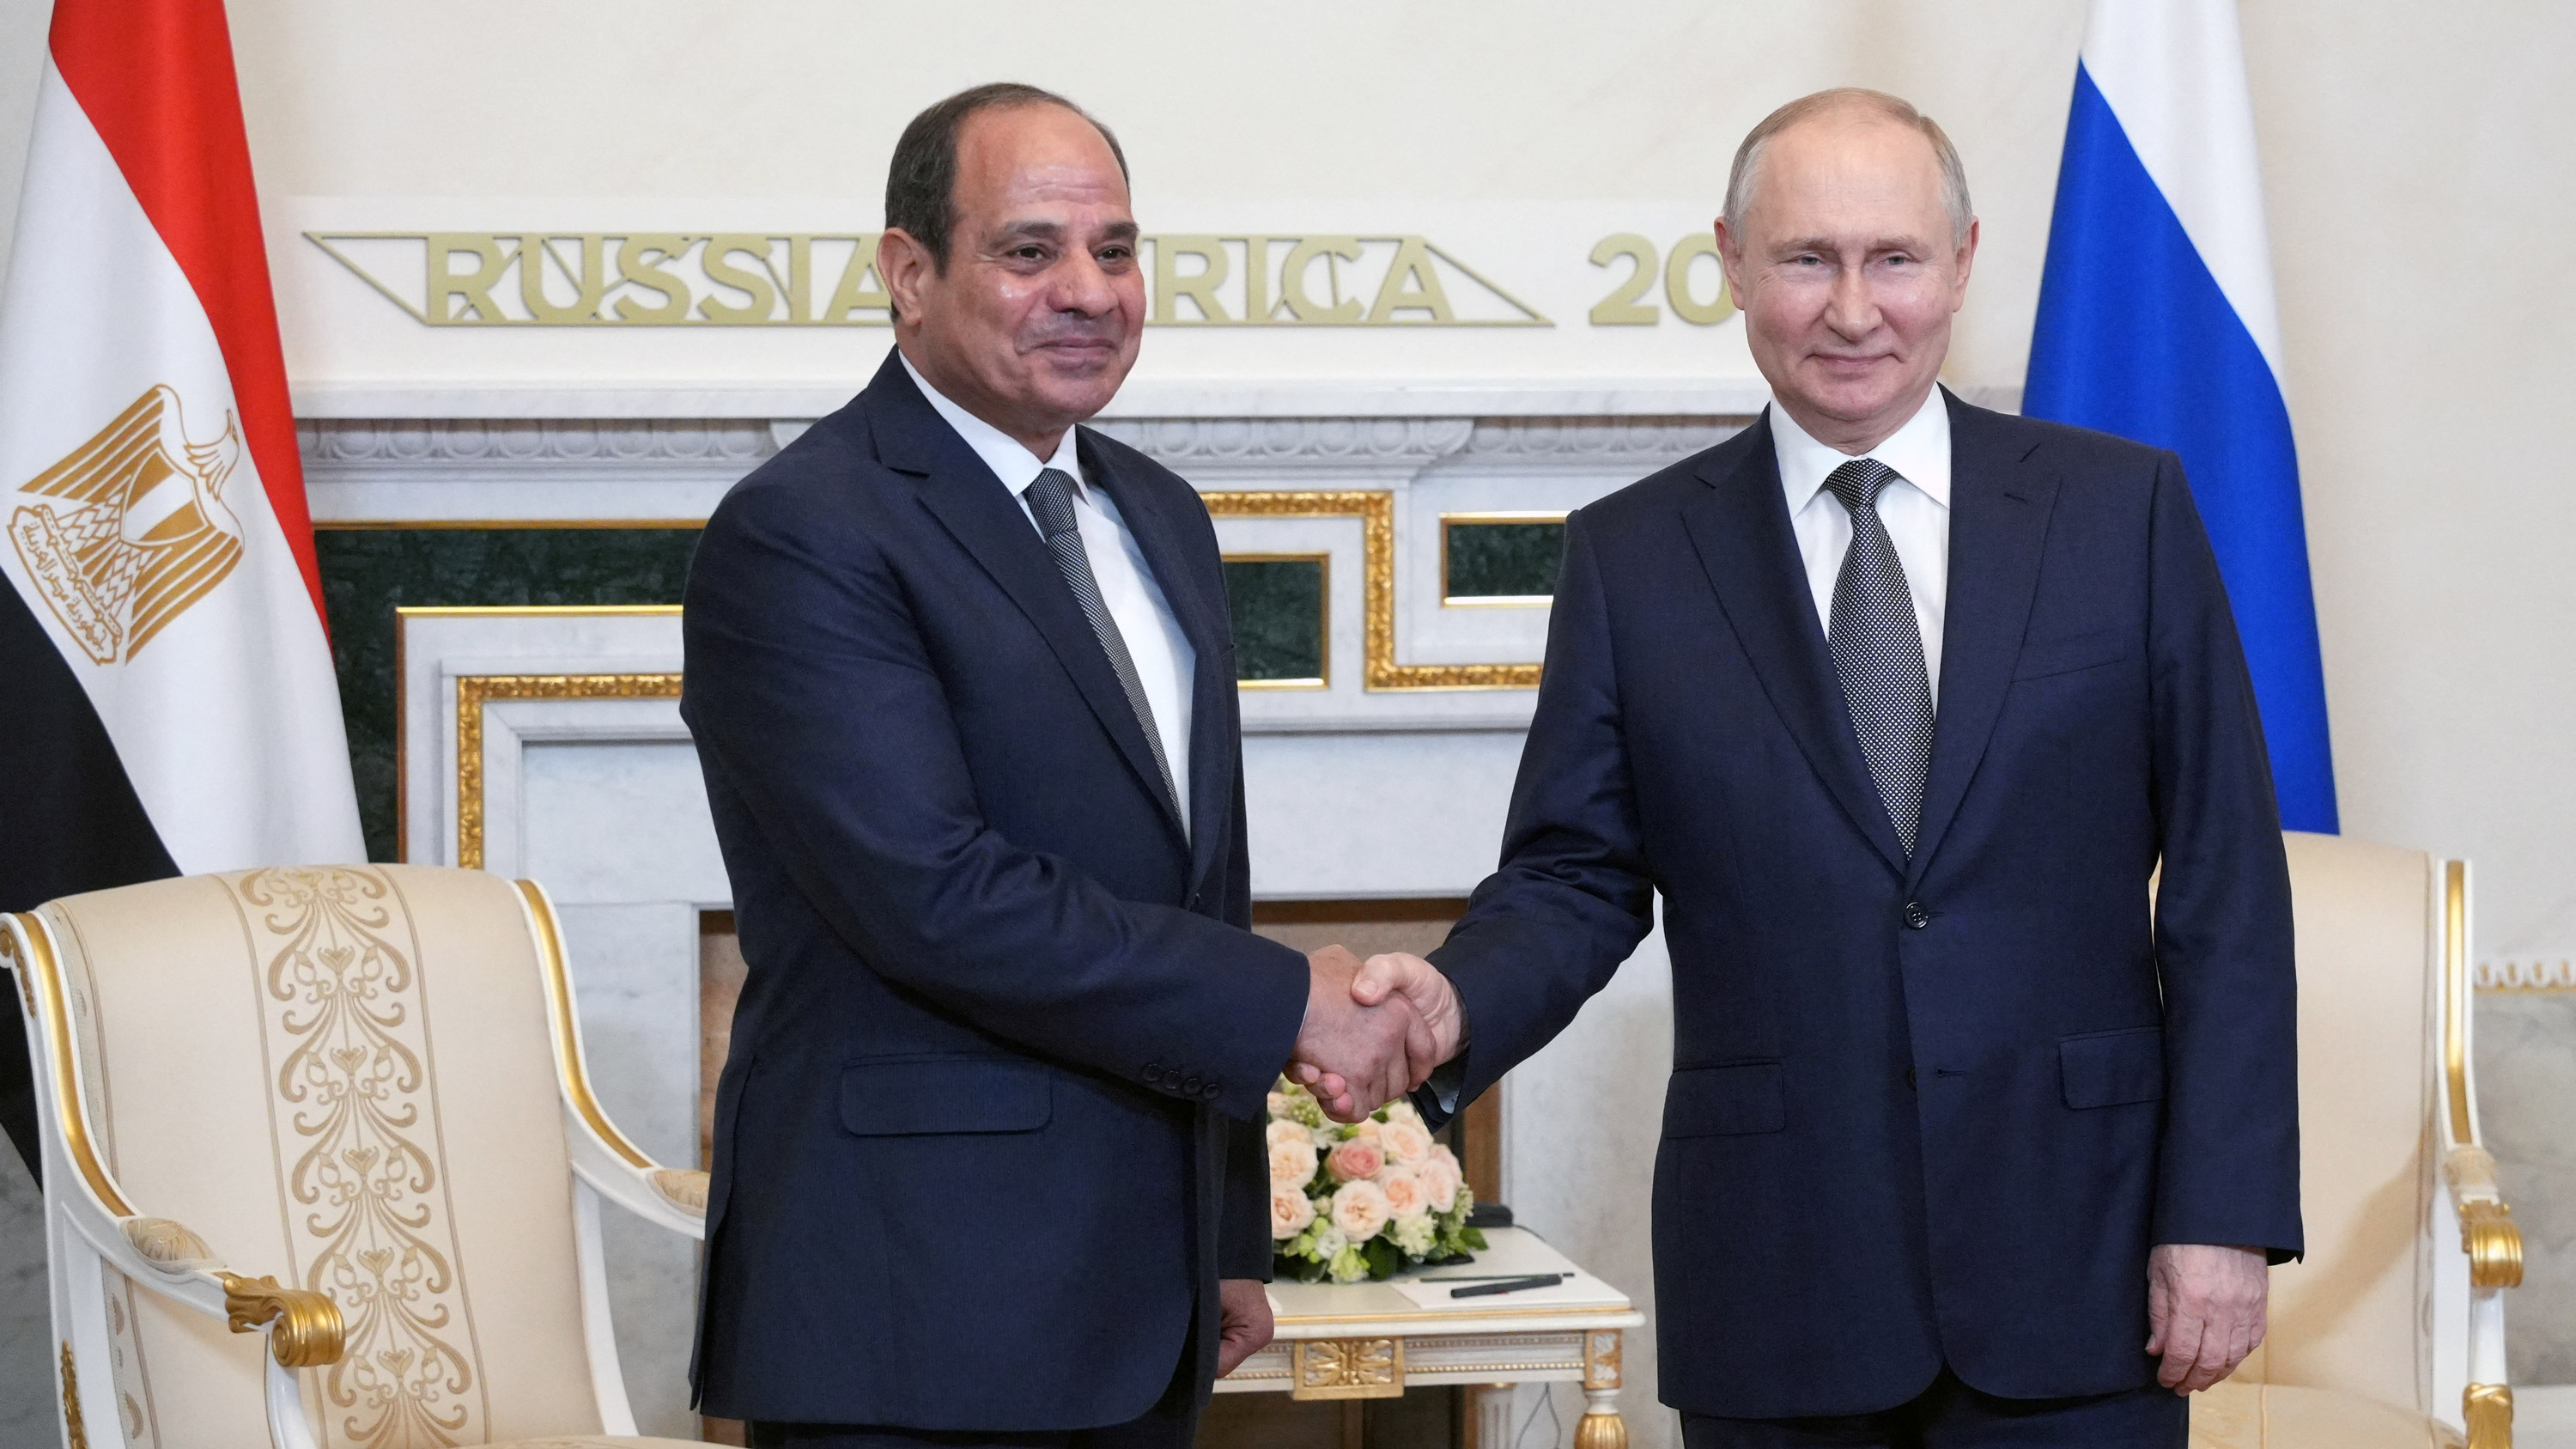 Russian President Vladimir Putin shakes hands with Egyptian President Abdel Fattah al-Sisi before a meeting on the sidelines of Russia-Africa summit in Saint Petersburg, Russia, on July 26, 2023.